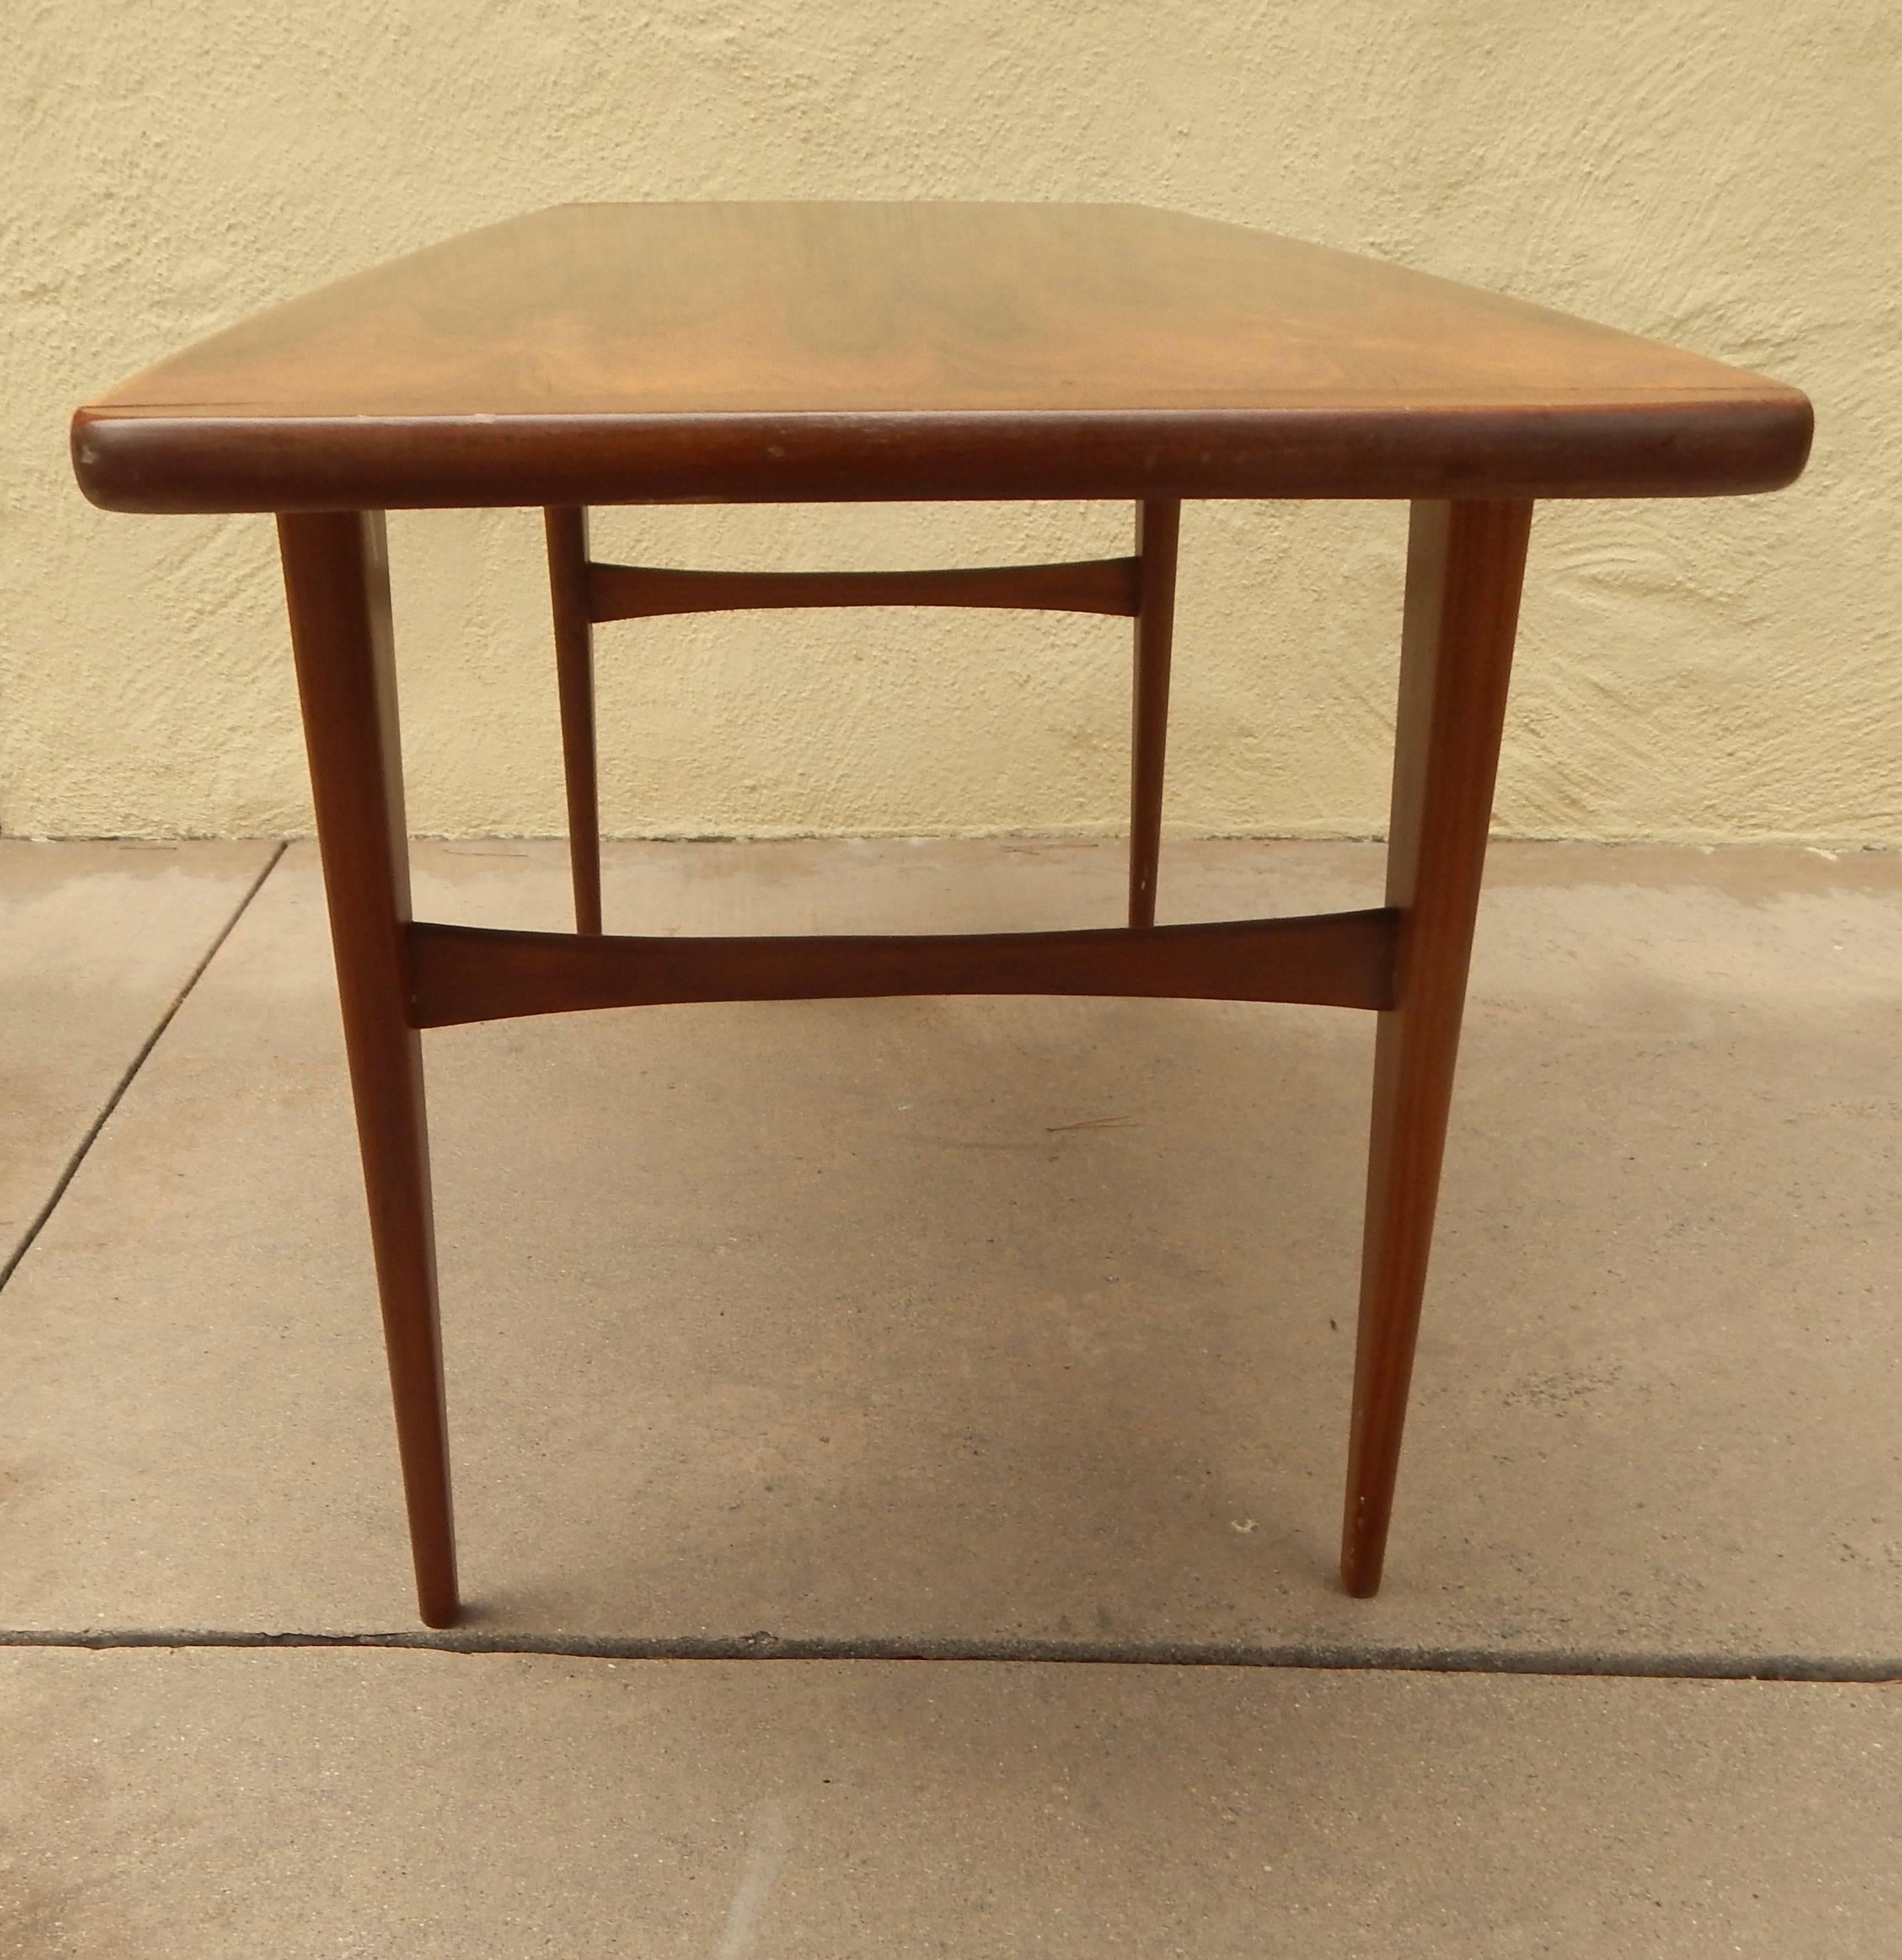 Swedish Mid-Century Modern Rosewood Coffee Table #10 In Excellent Condition For Sale In Richmond, VA